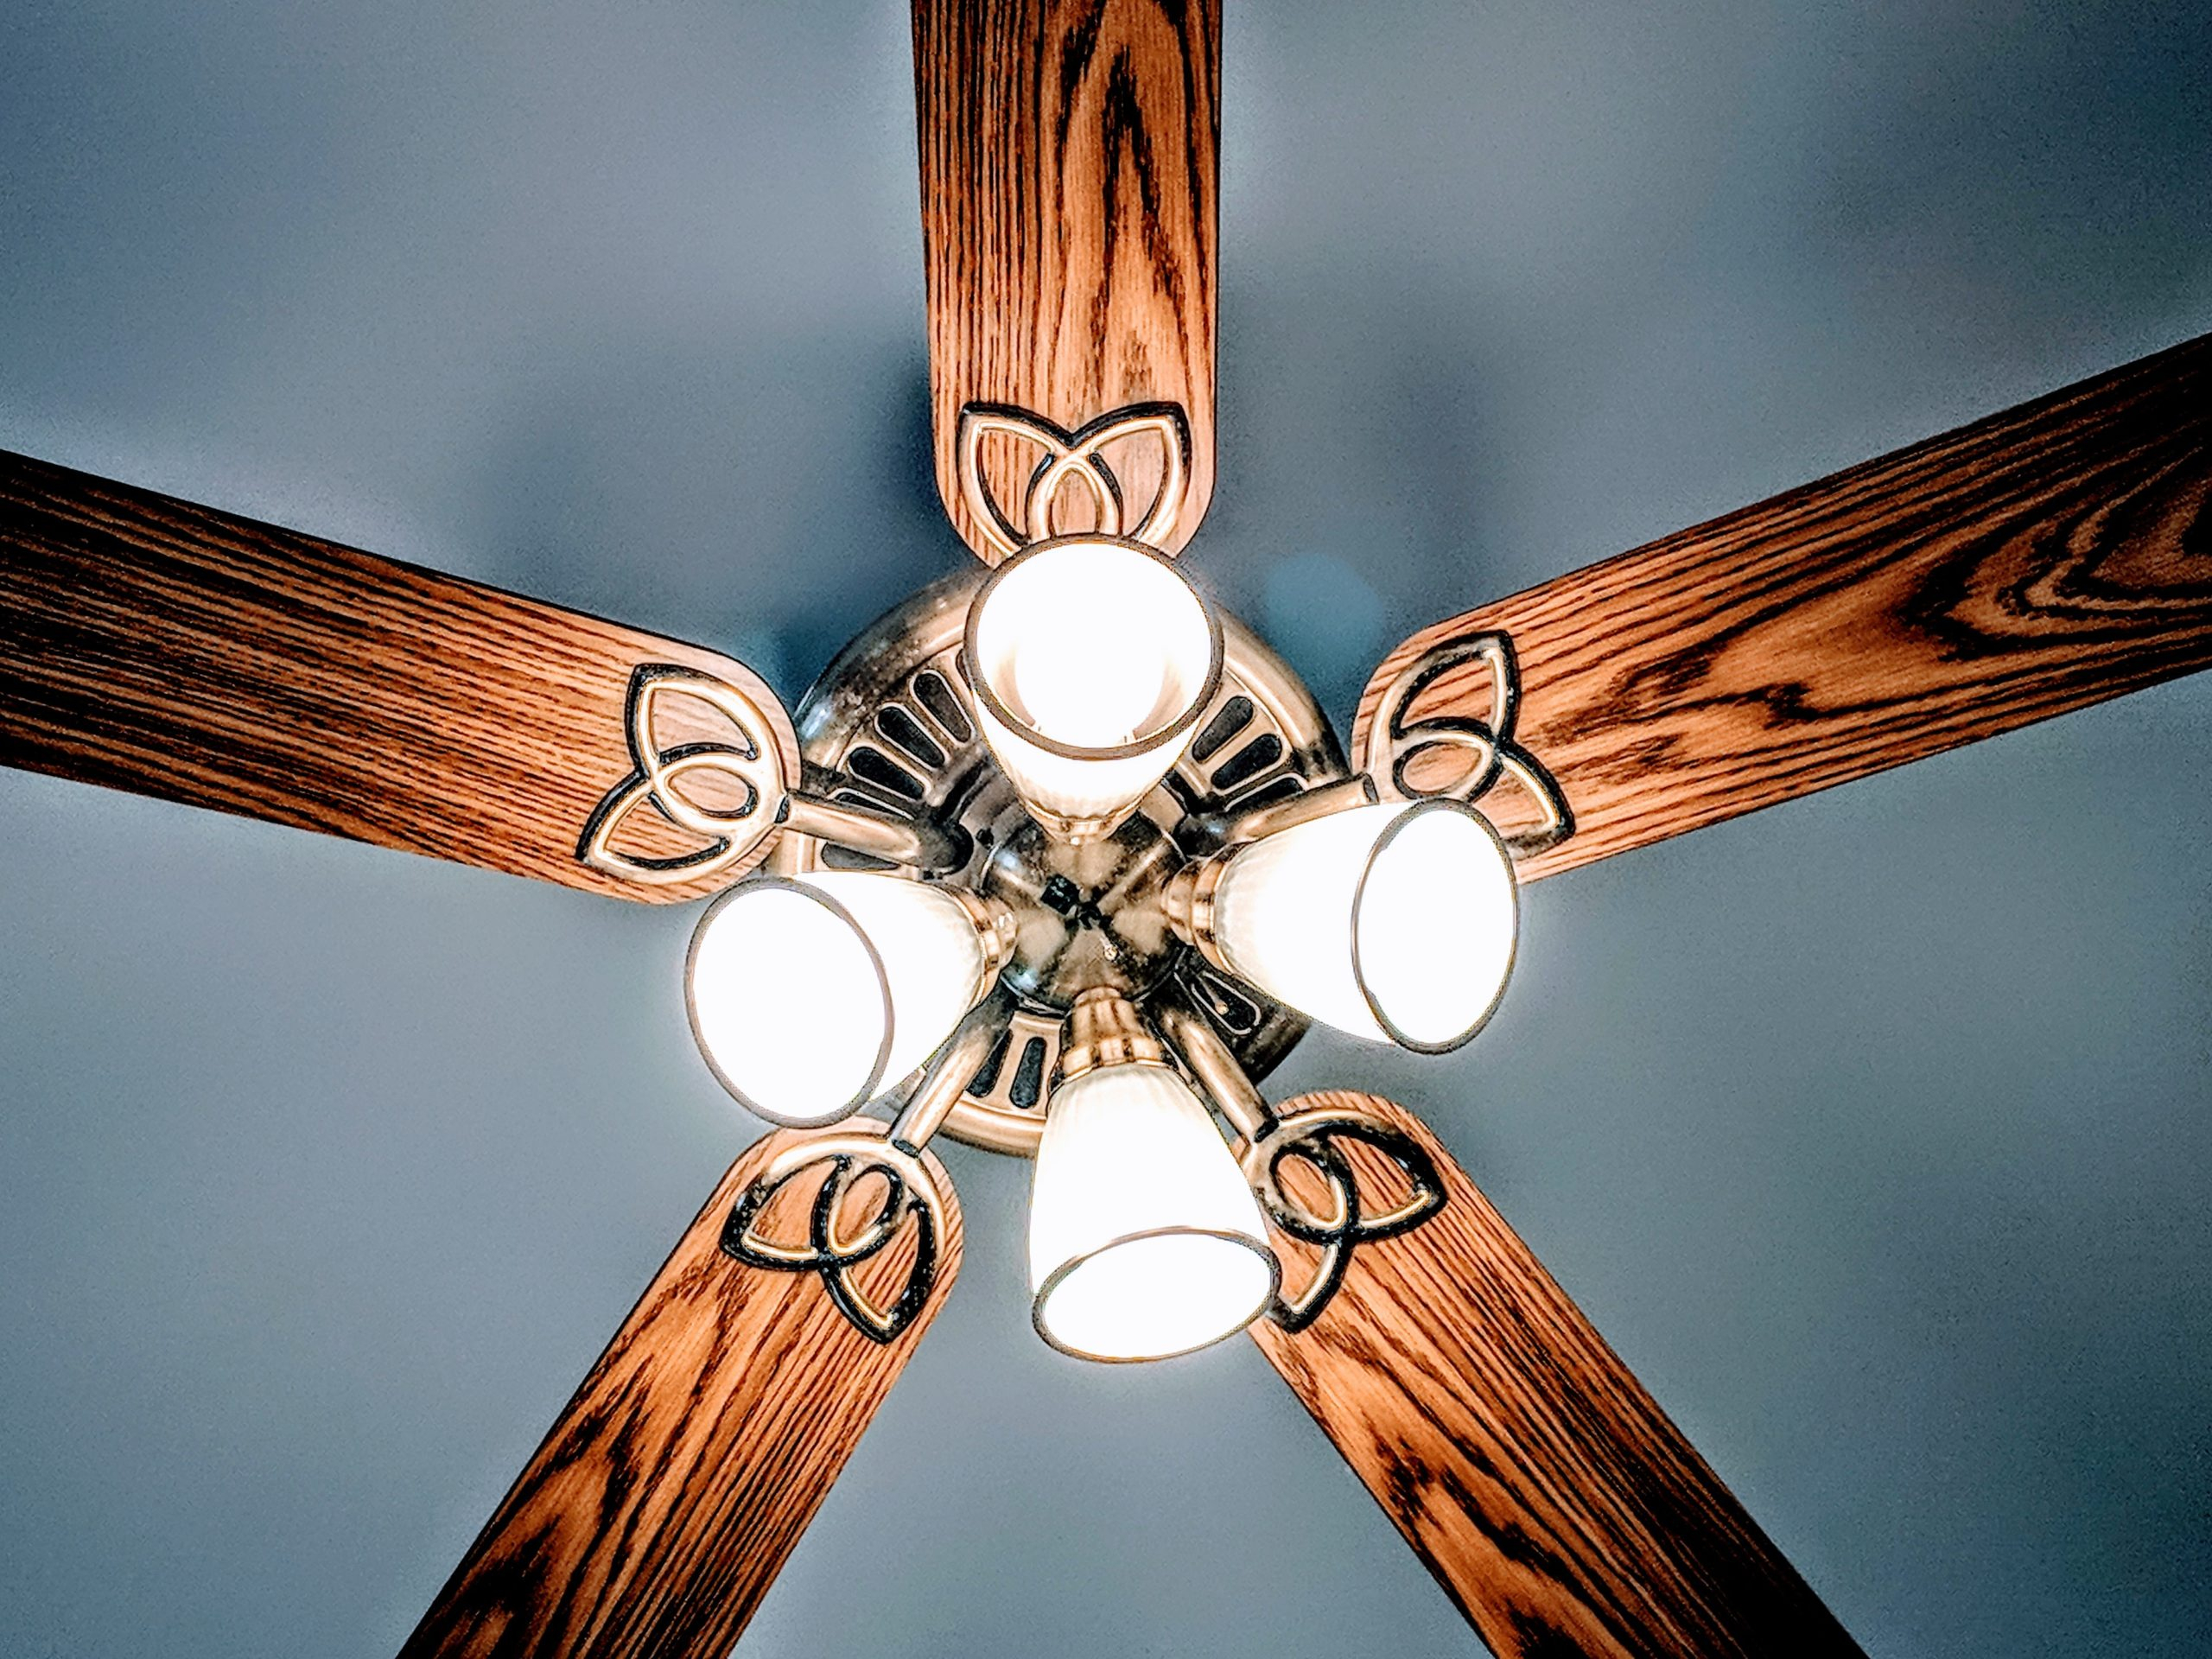 Ceiling Fan Fix That Wobbling Ceiling Fan Hub Home Services intended for dimensions 2560 X 1920